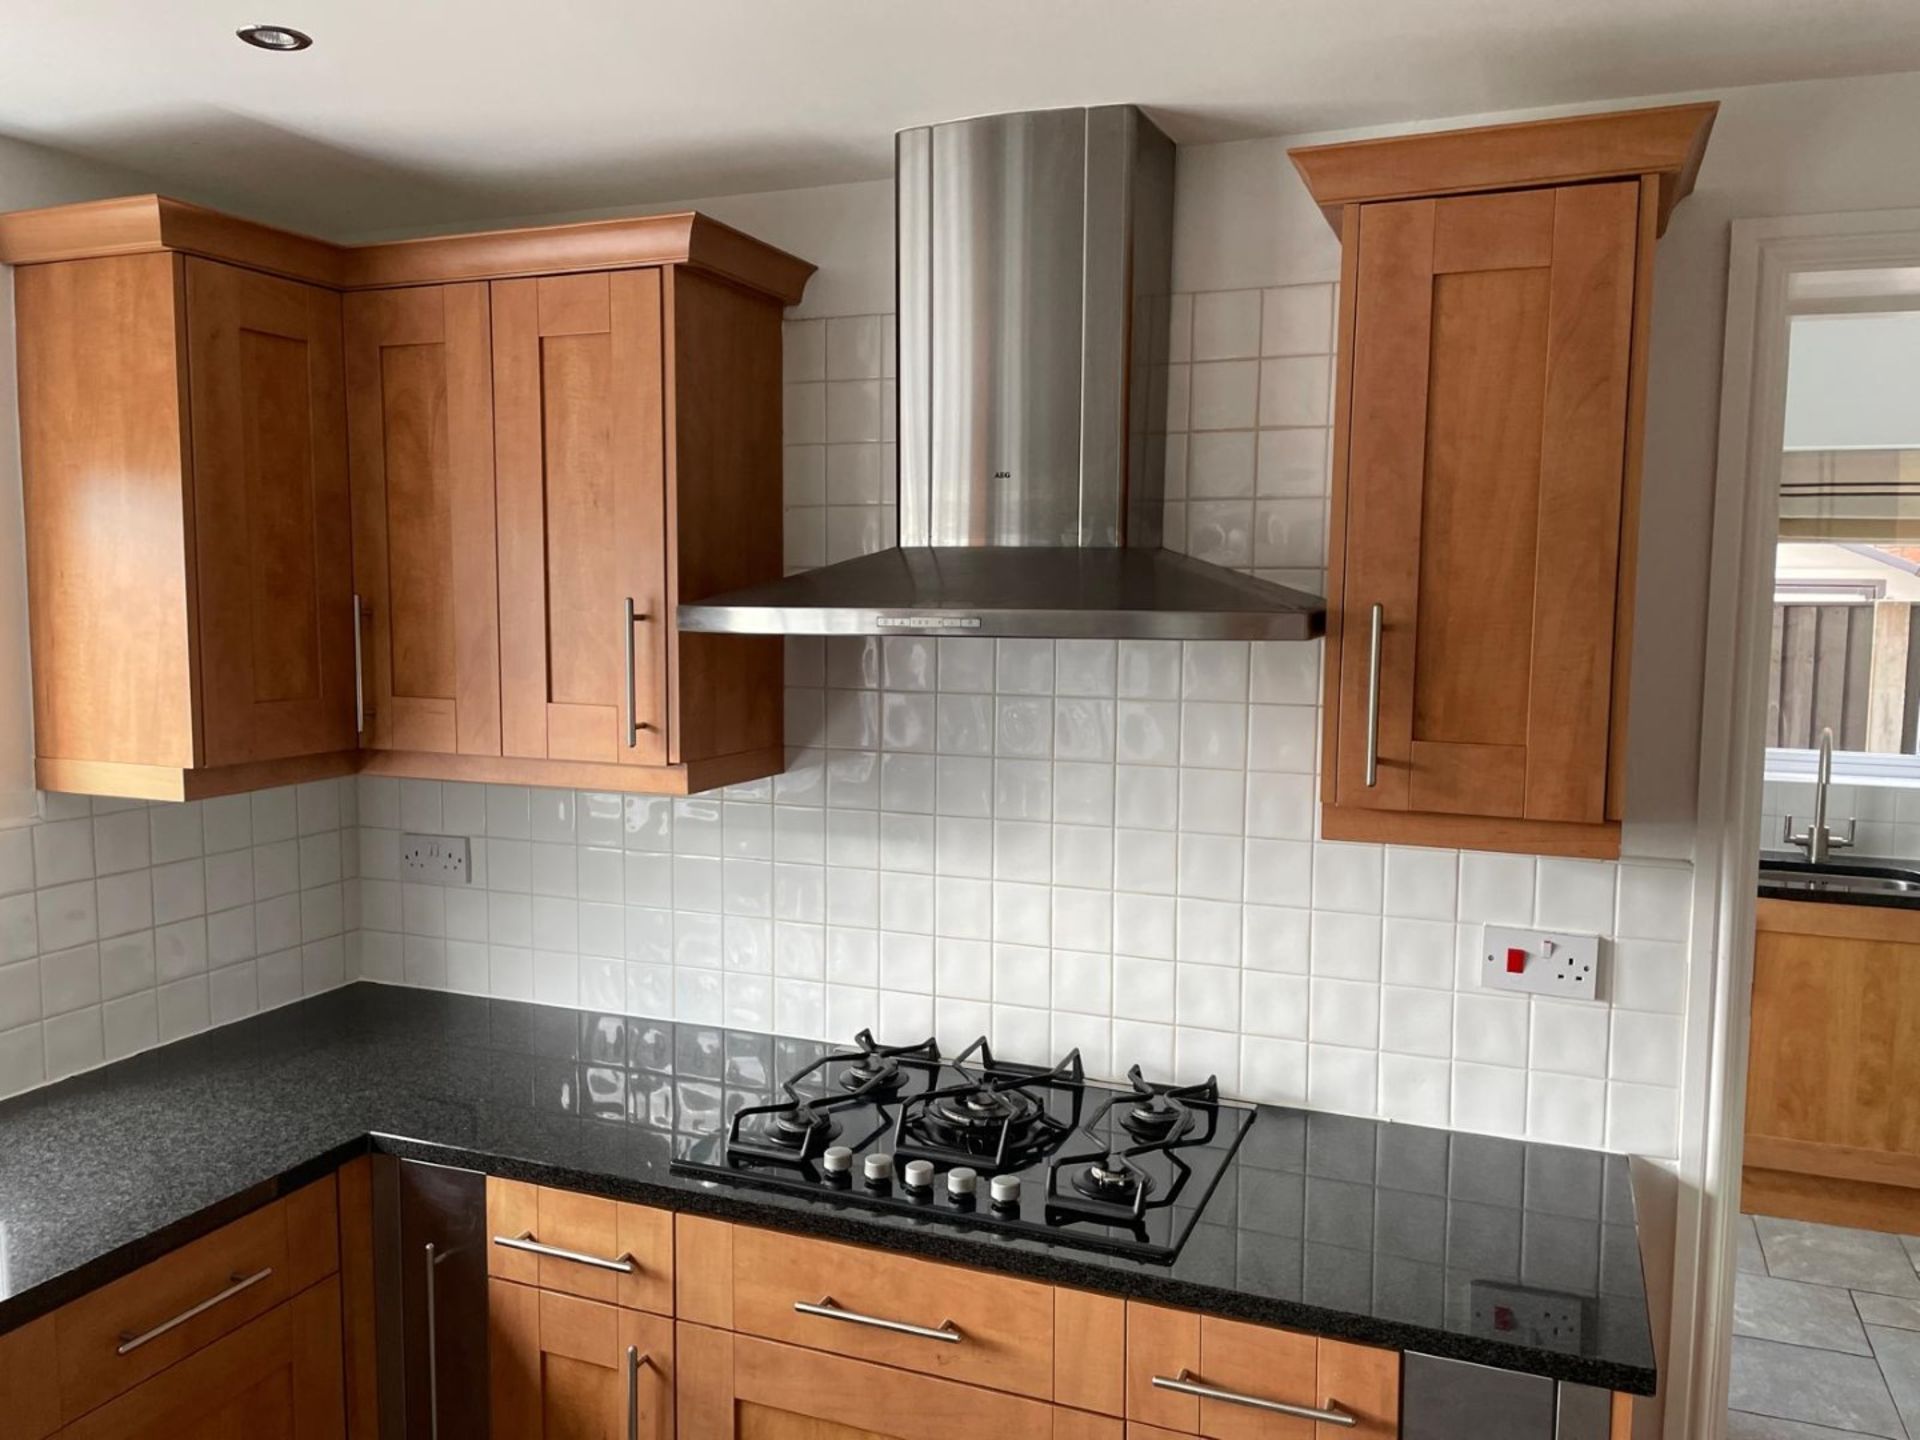 1 x Shaker-style, Feature-rich Fitted Kitchen with Solid Wood Doors, Granite Worktops and Appliances - Image 66 of 111